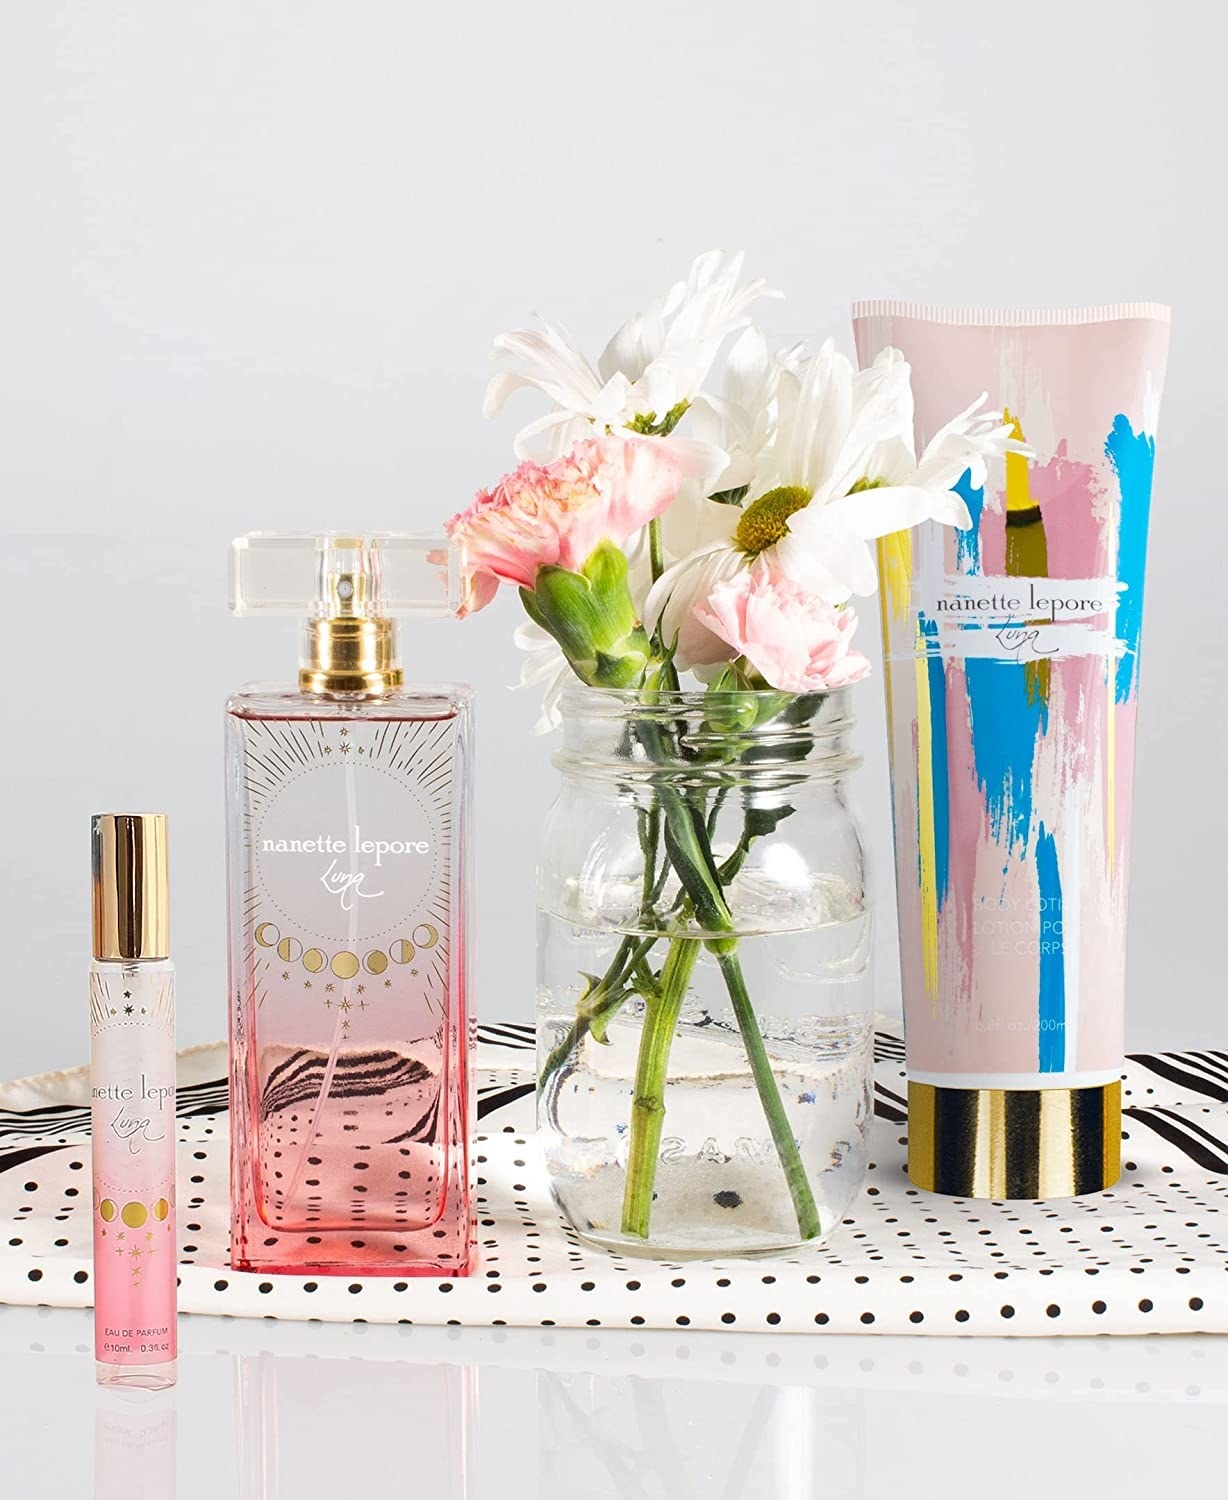 A set of three perfumes on a table. One bottle is small and pink, the other is large regtangular and pink and the other is in a pink tube with blue and yellow detailing